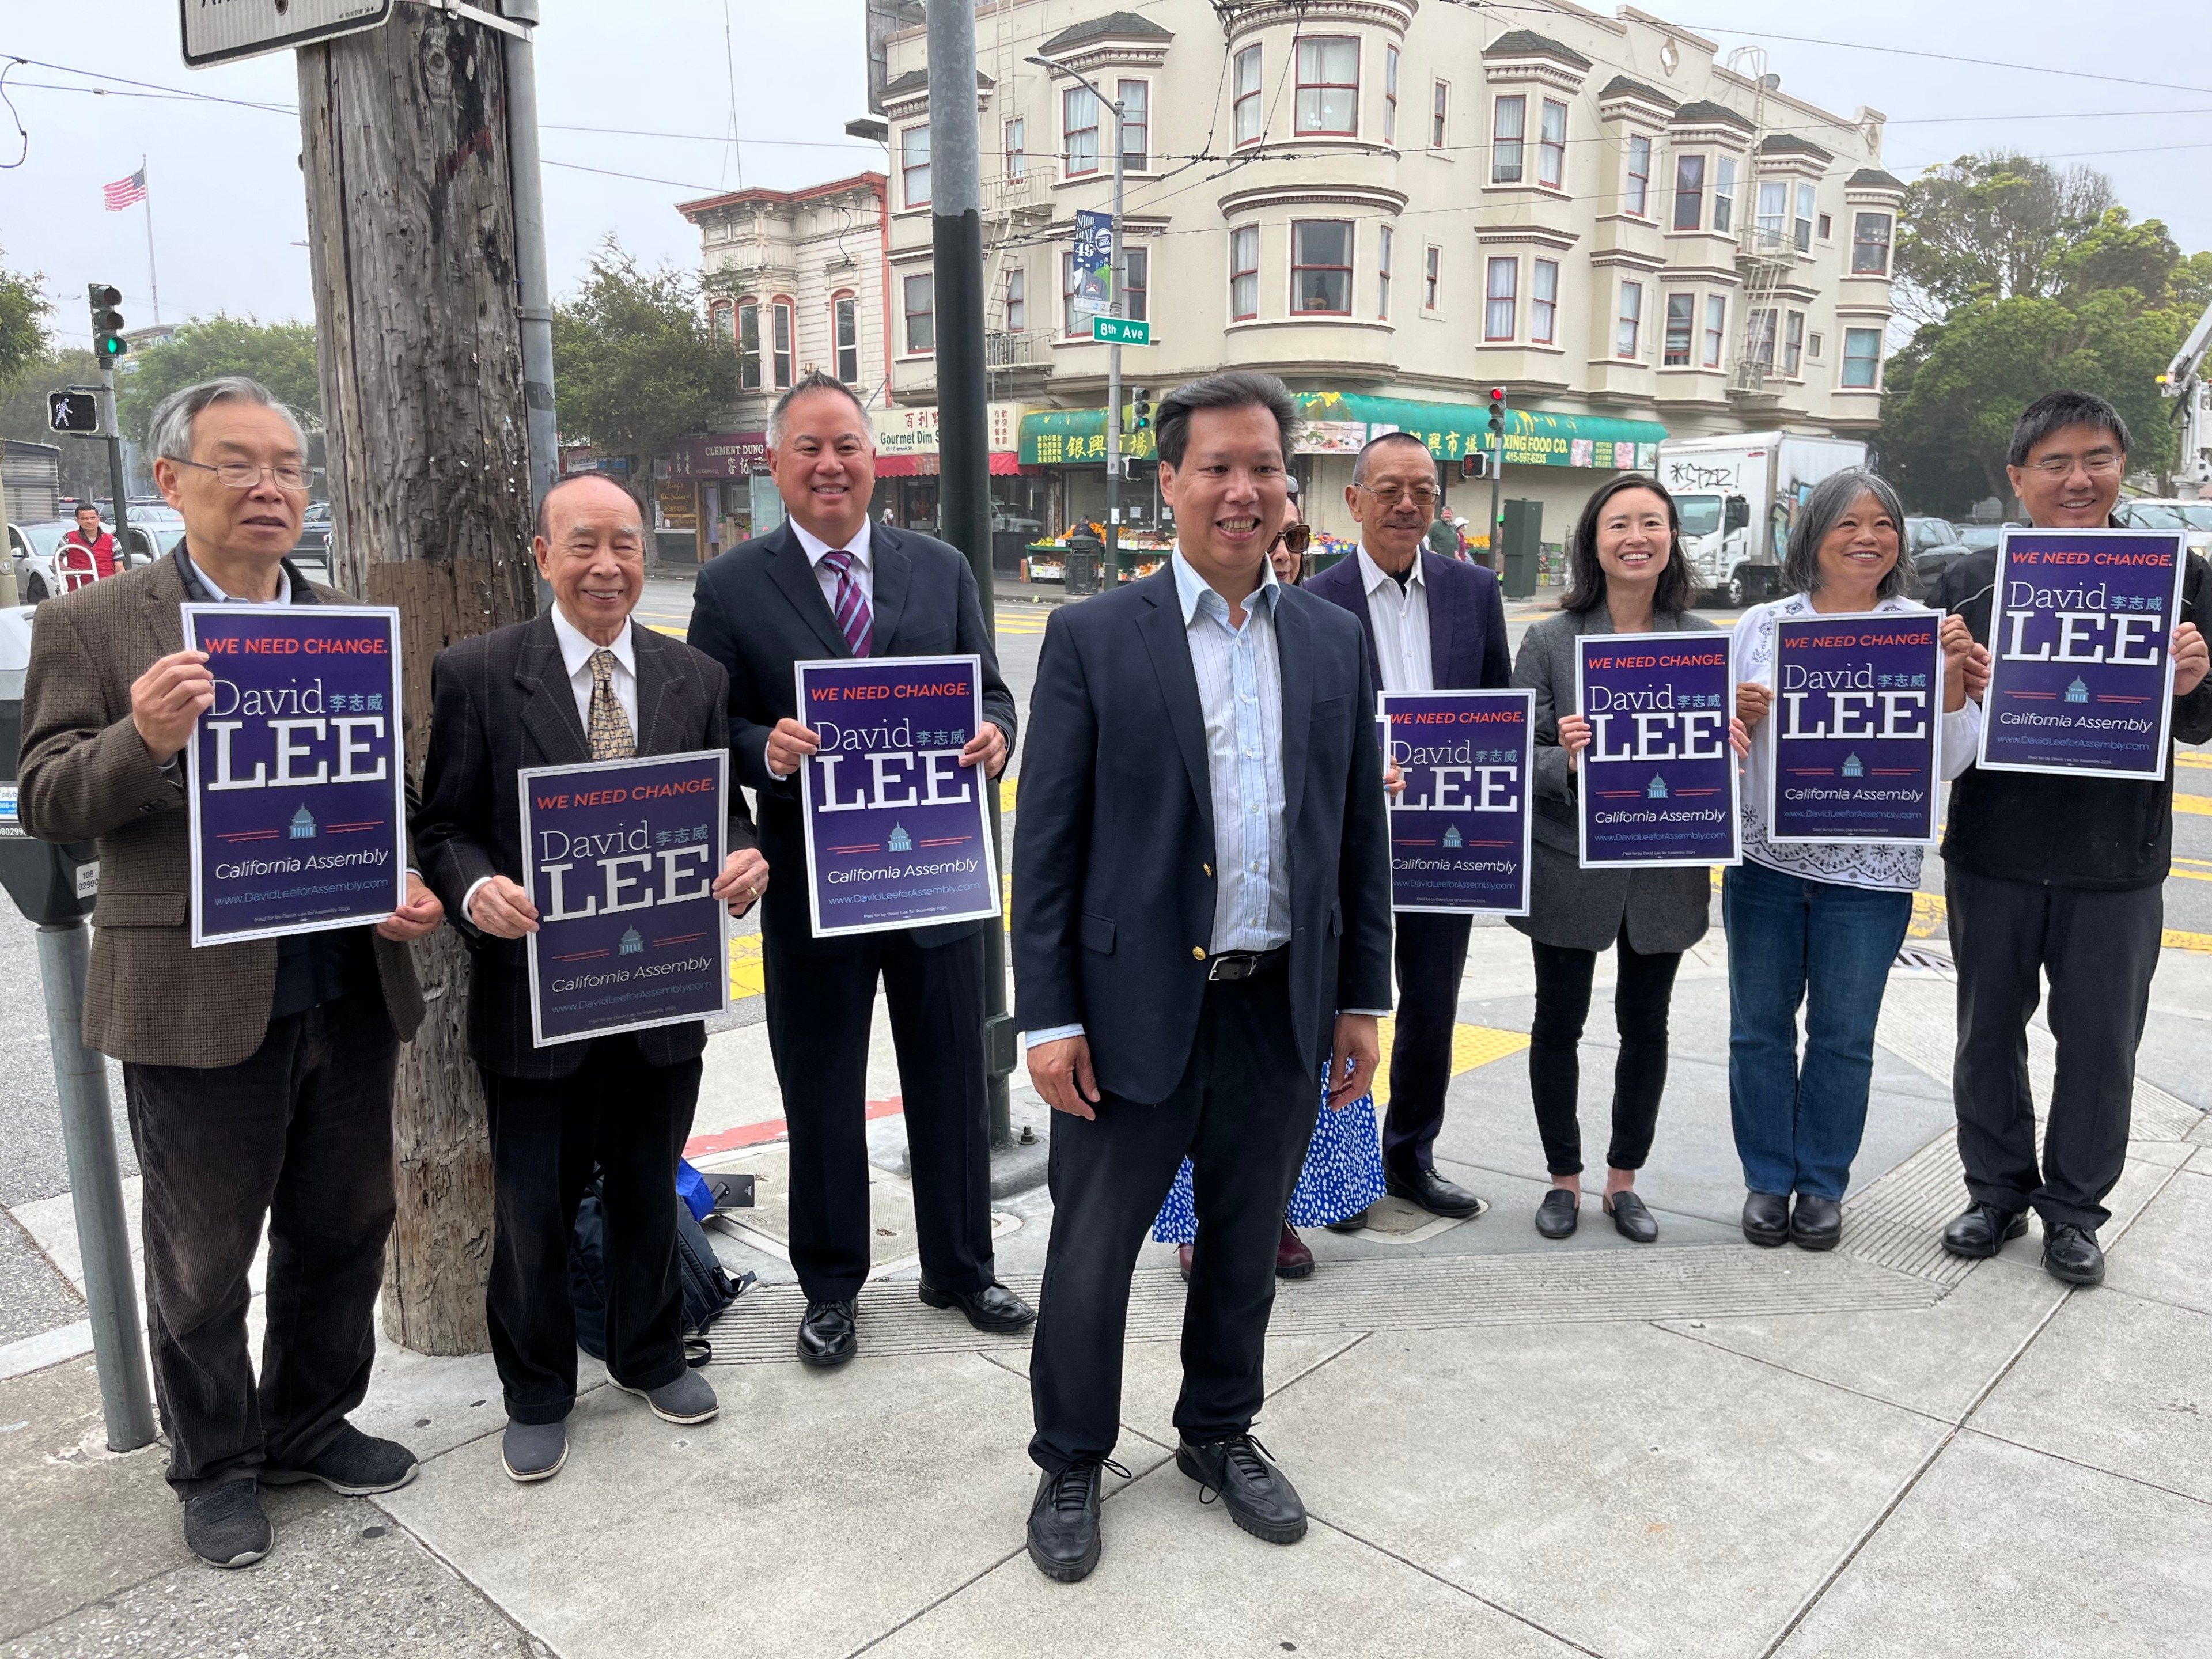 A group of people smiling, holding political campaign signs for David Lee for California Assembly, on a city street.